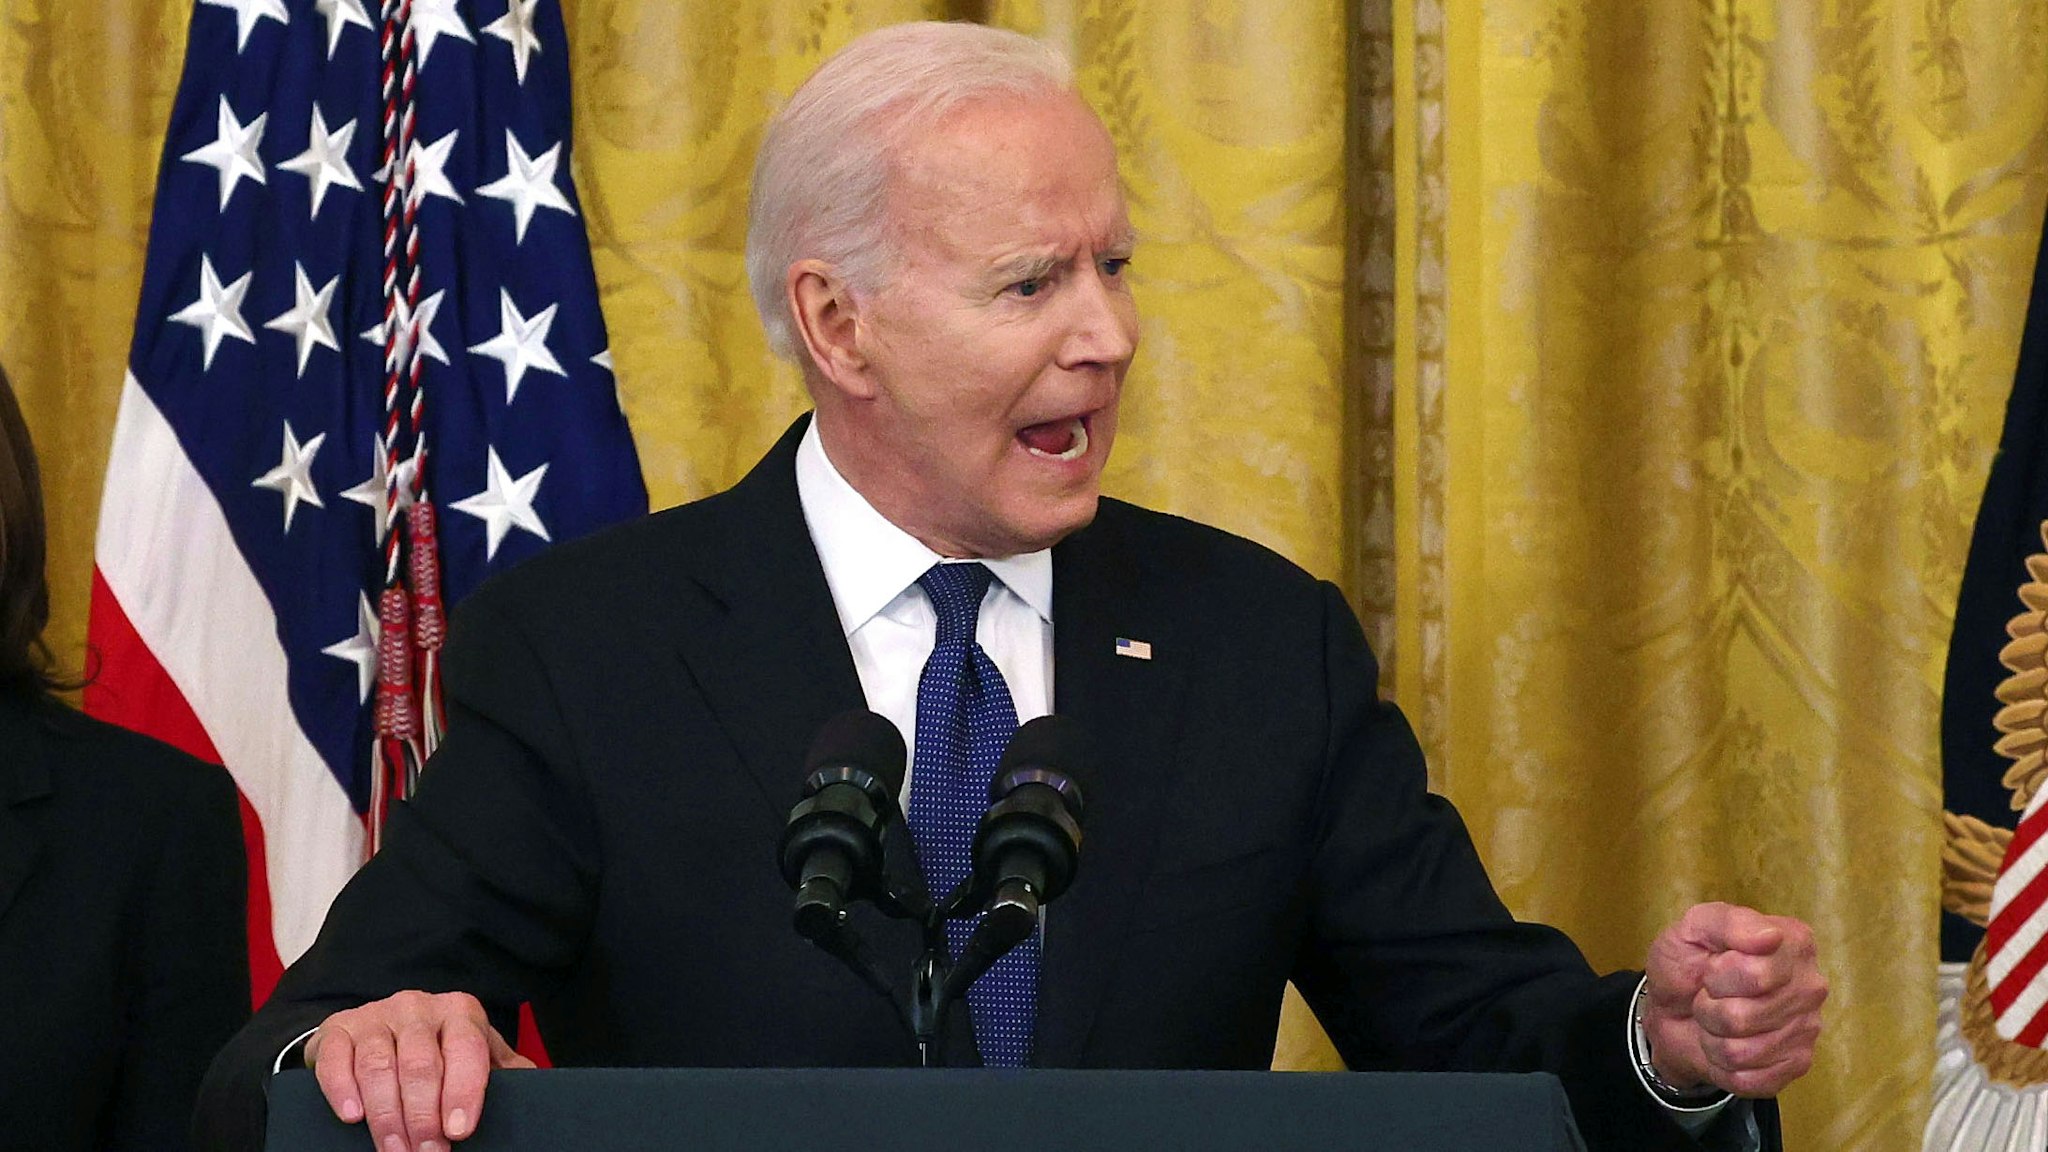 WASHINGTON, DC - MAY 20: U.S. President Joe Biden gestures as he delivers remarks, before a signing ceremony for the COVID-19 Hate Crimes Act in the East Room of the White House on May 20, 2021 in Washington, DC.  The legislation, drafted in response to the increased violence against the Asian American and Pacific Islander (AAPI) community during the Coronavirus pandemic, will create a new position in the Department of Justice to focus on the rise in hate crimes and provide resources to federal, state, and local jurisdictions to better report cases.